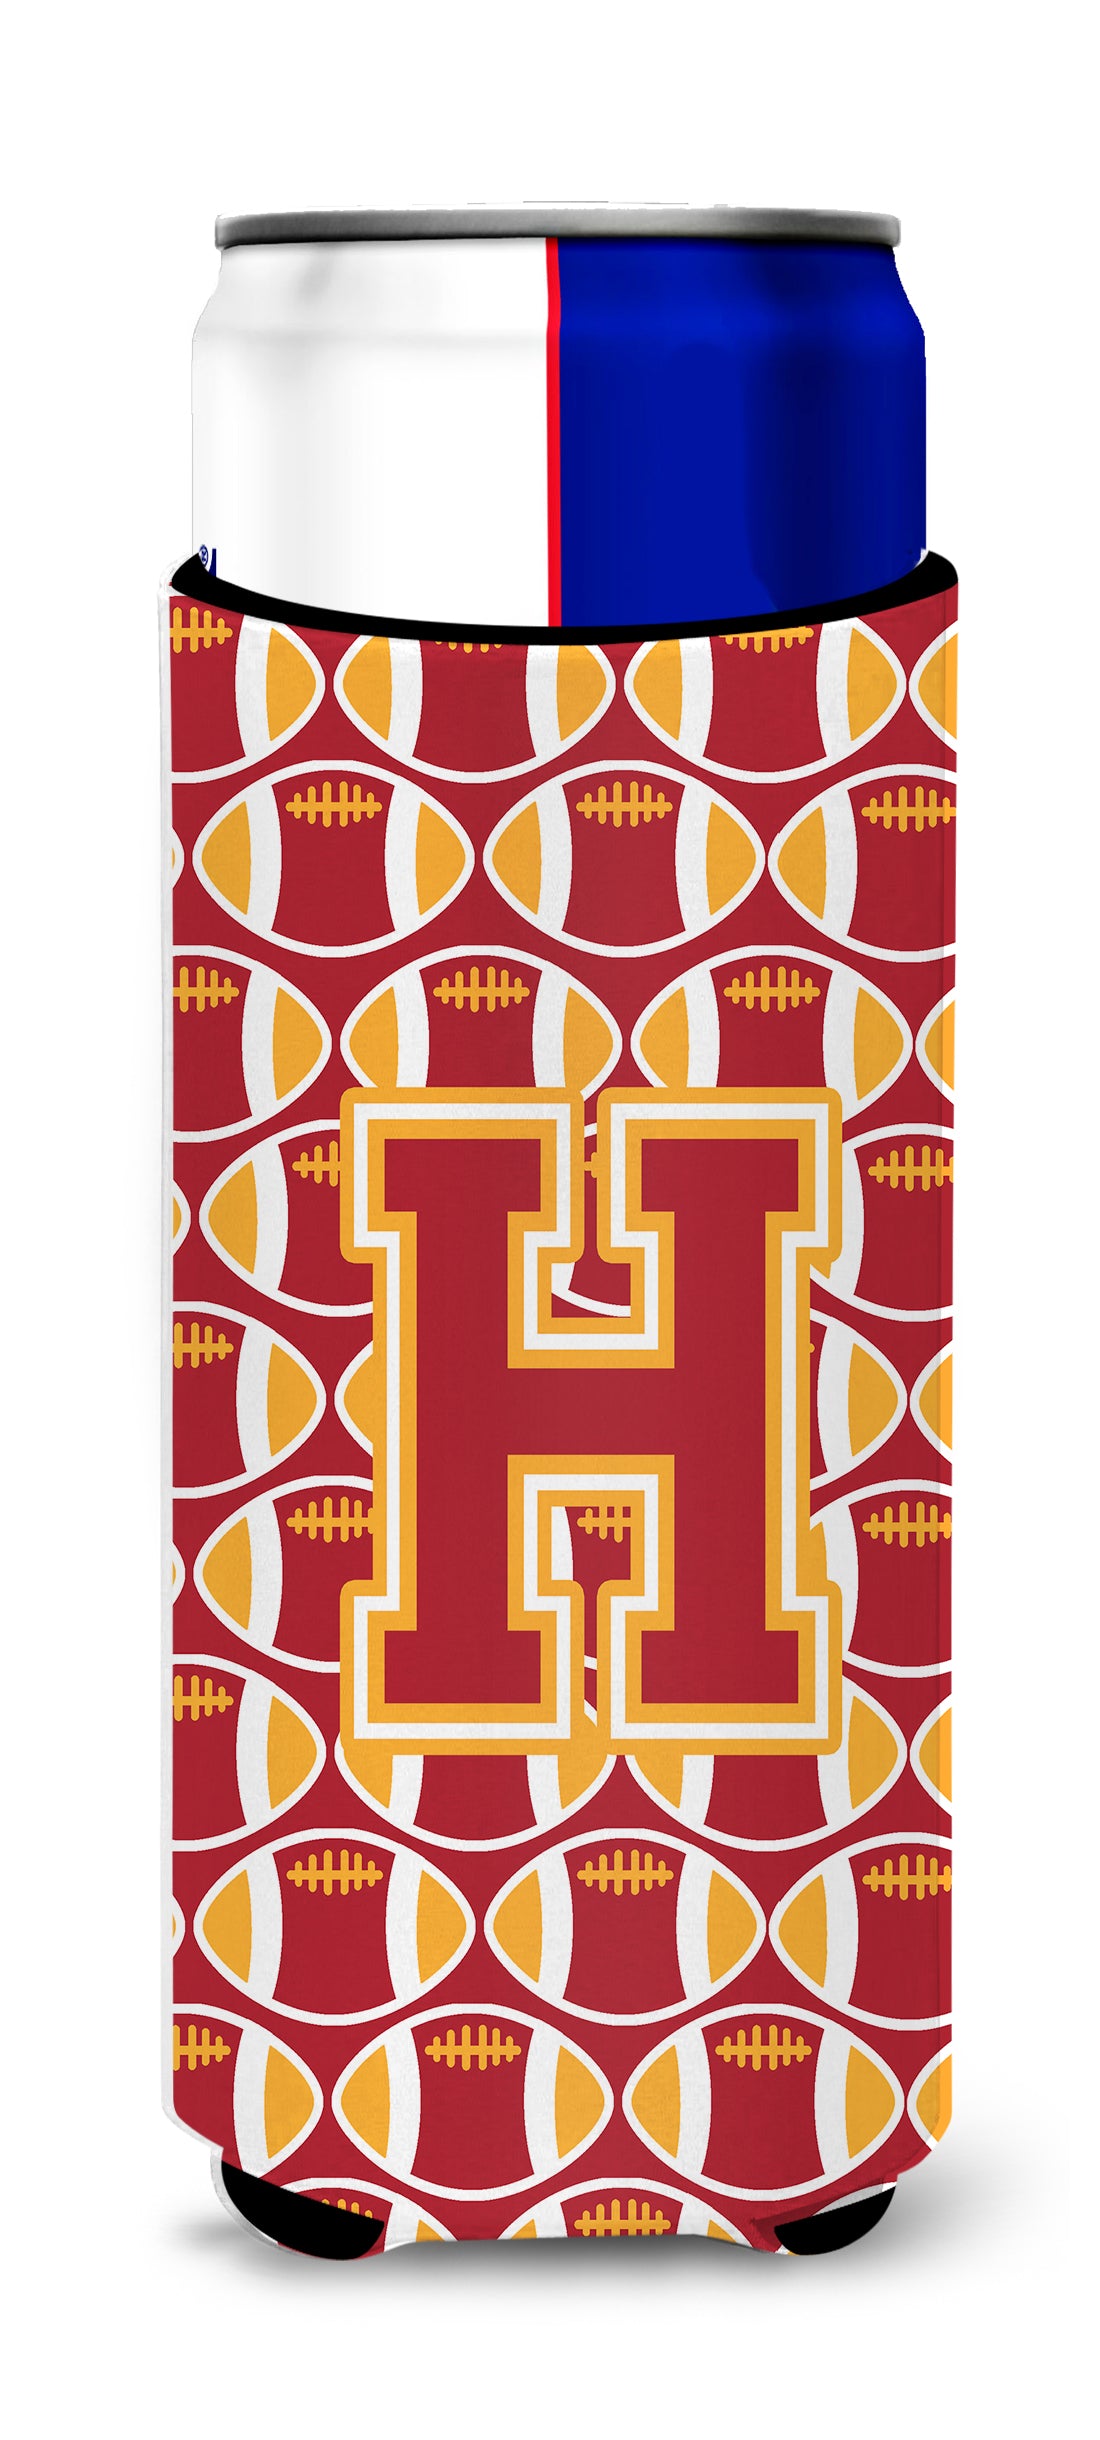 Letter H Football Cardinal and Gold Ultra Beverage Insulators for slim cans CJ1070-HMUK